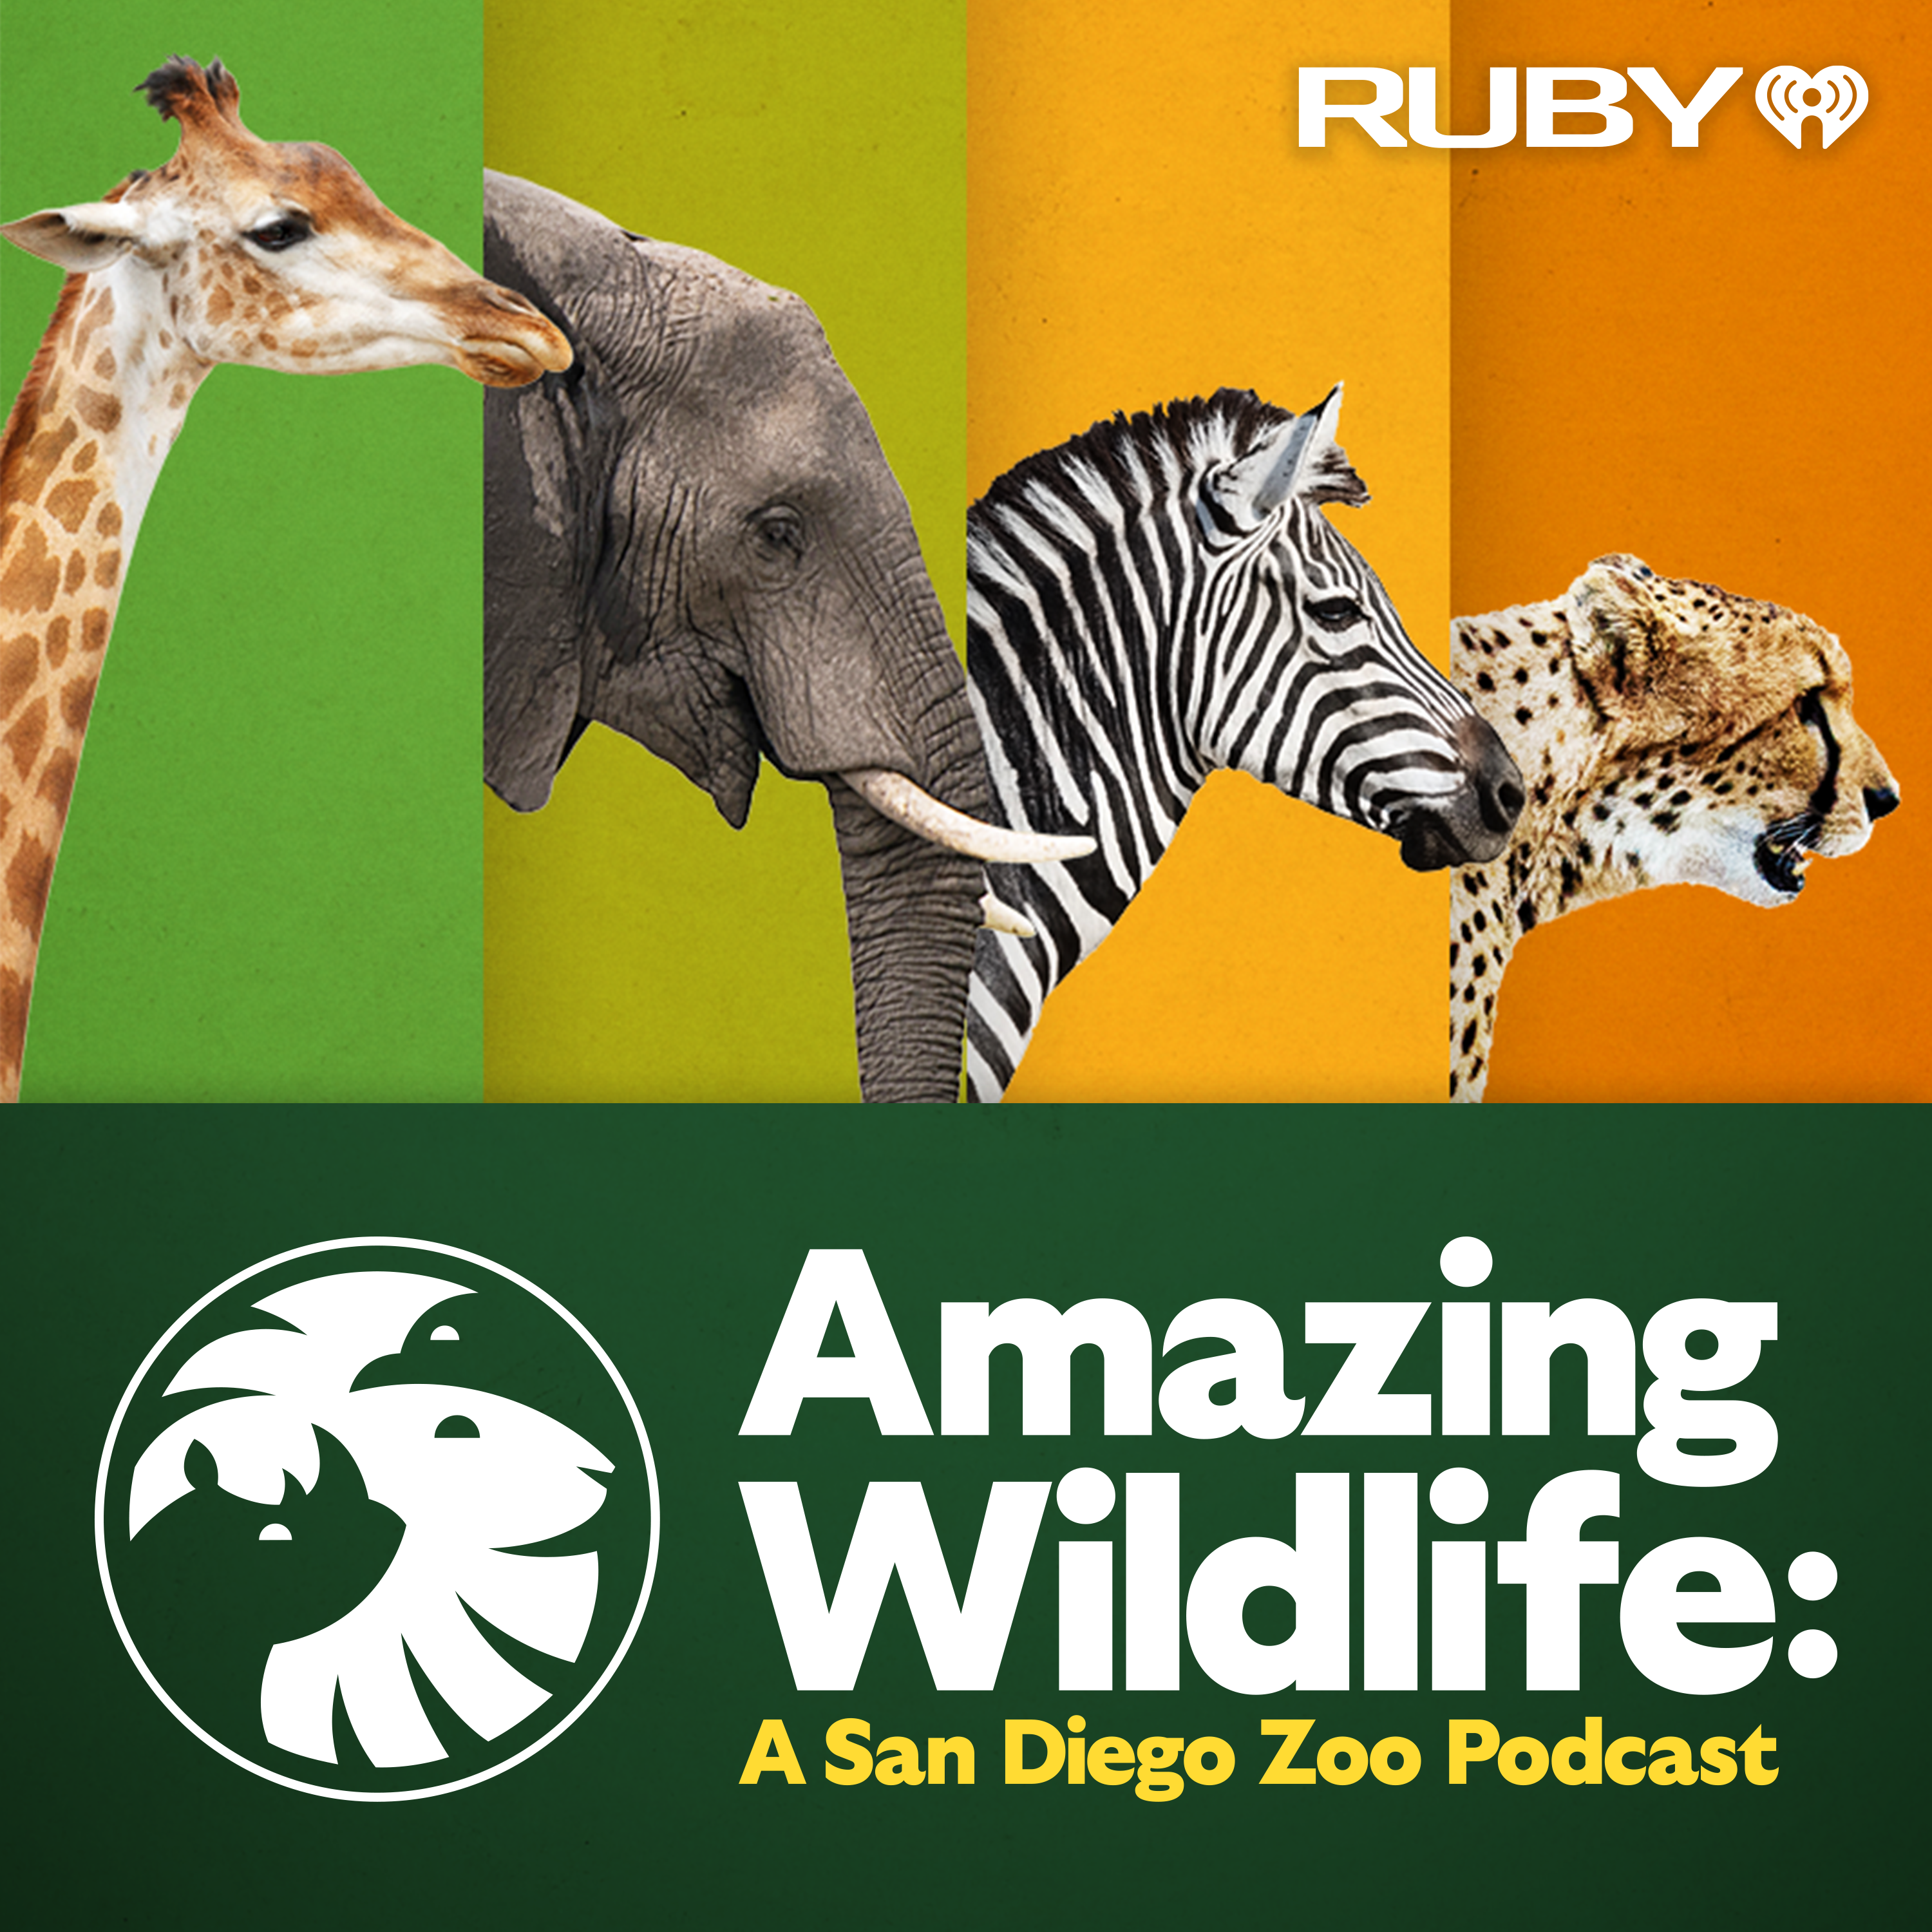 Announcing Season 2 of Amazing Wildlife: A San Diego Zoo Podcast